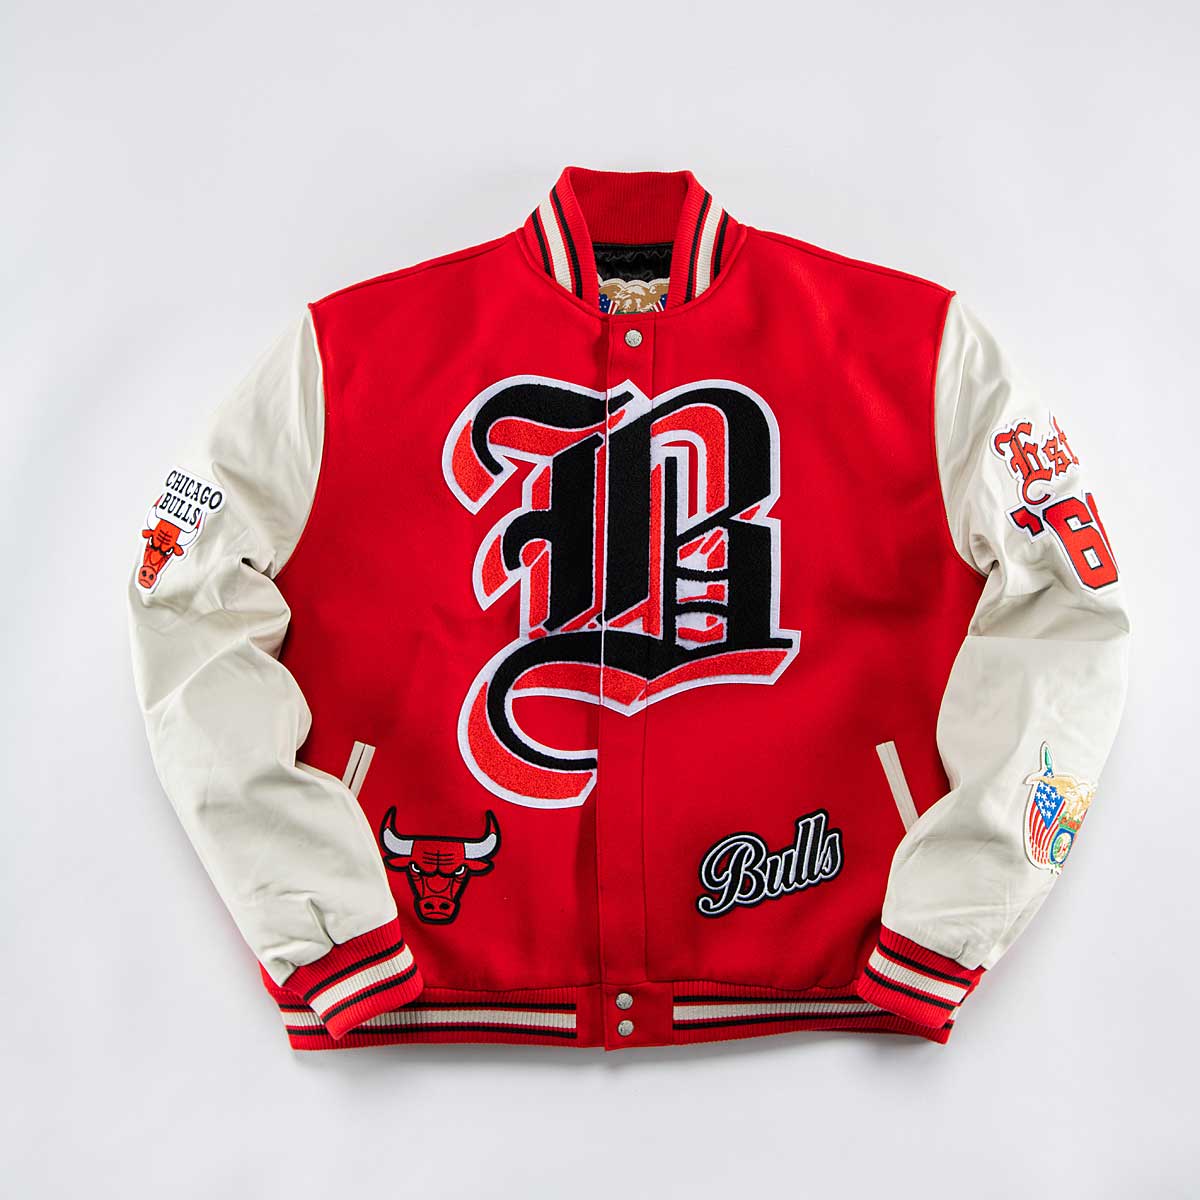 FROM CHAMPIONSHIPS TO ICONIC NBA JACKETS BY JEFF HAMILTON